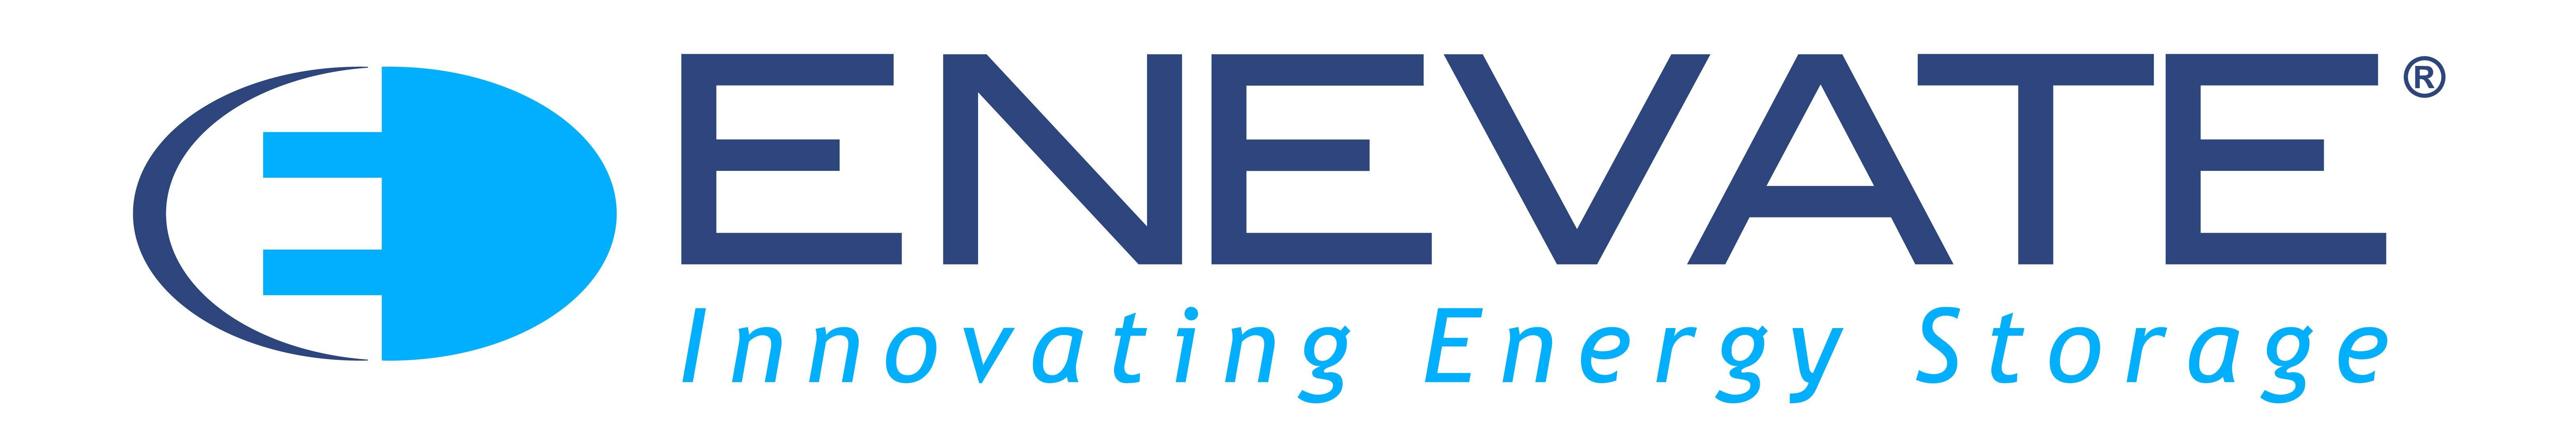 Enevate Announces 5-Minute Extreme Fast Charge Battery Technology for ...